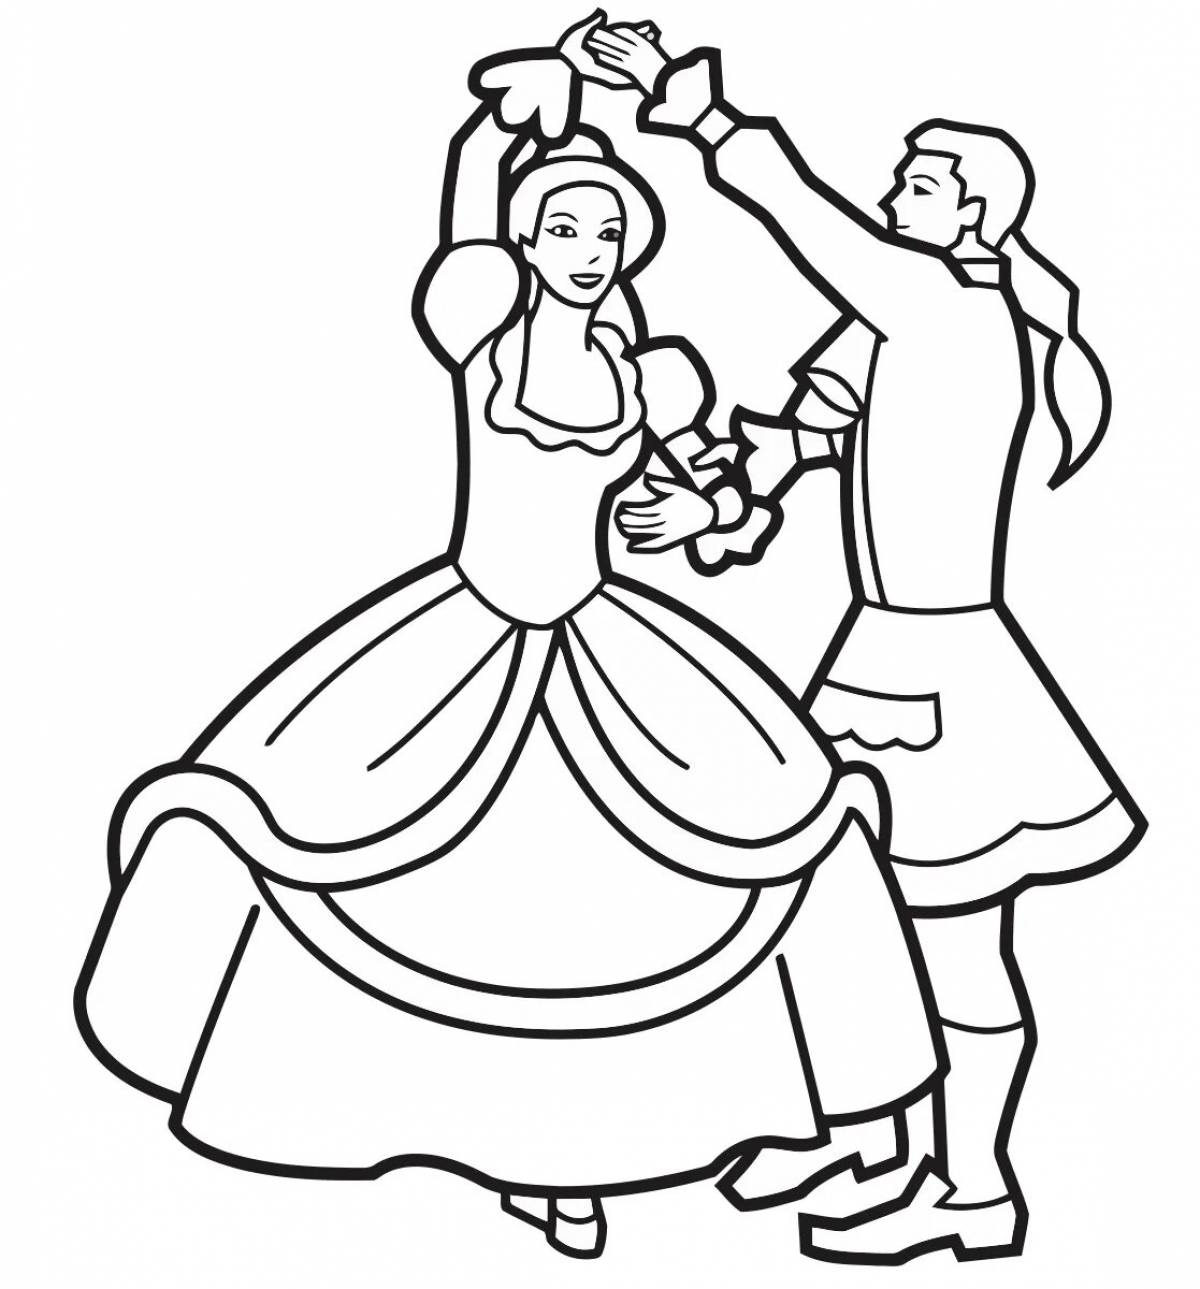 Animated waltz coloring page